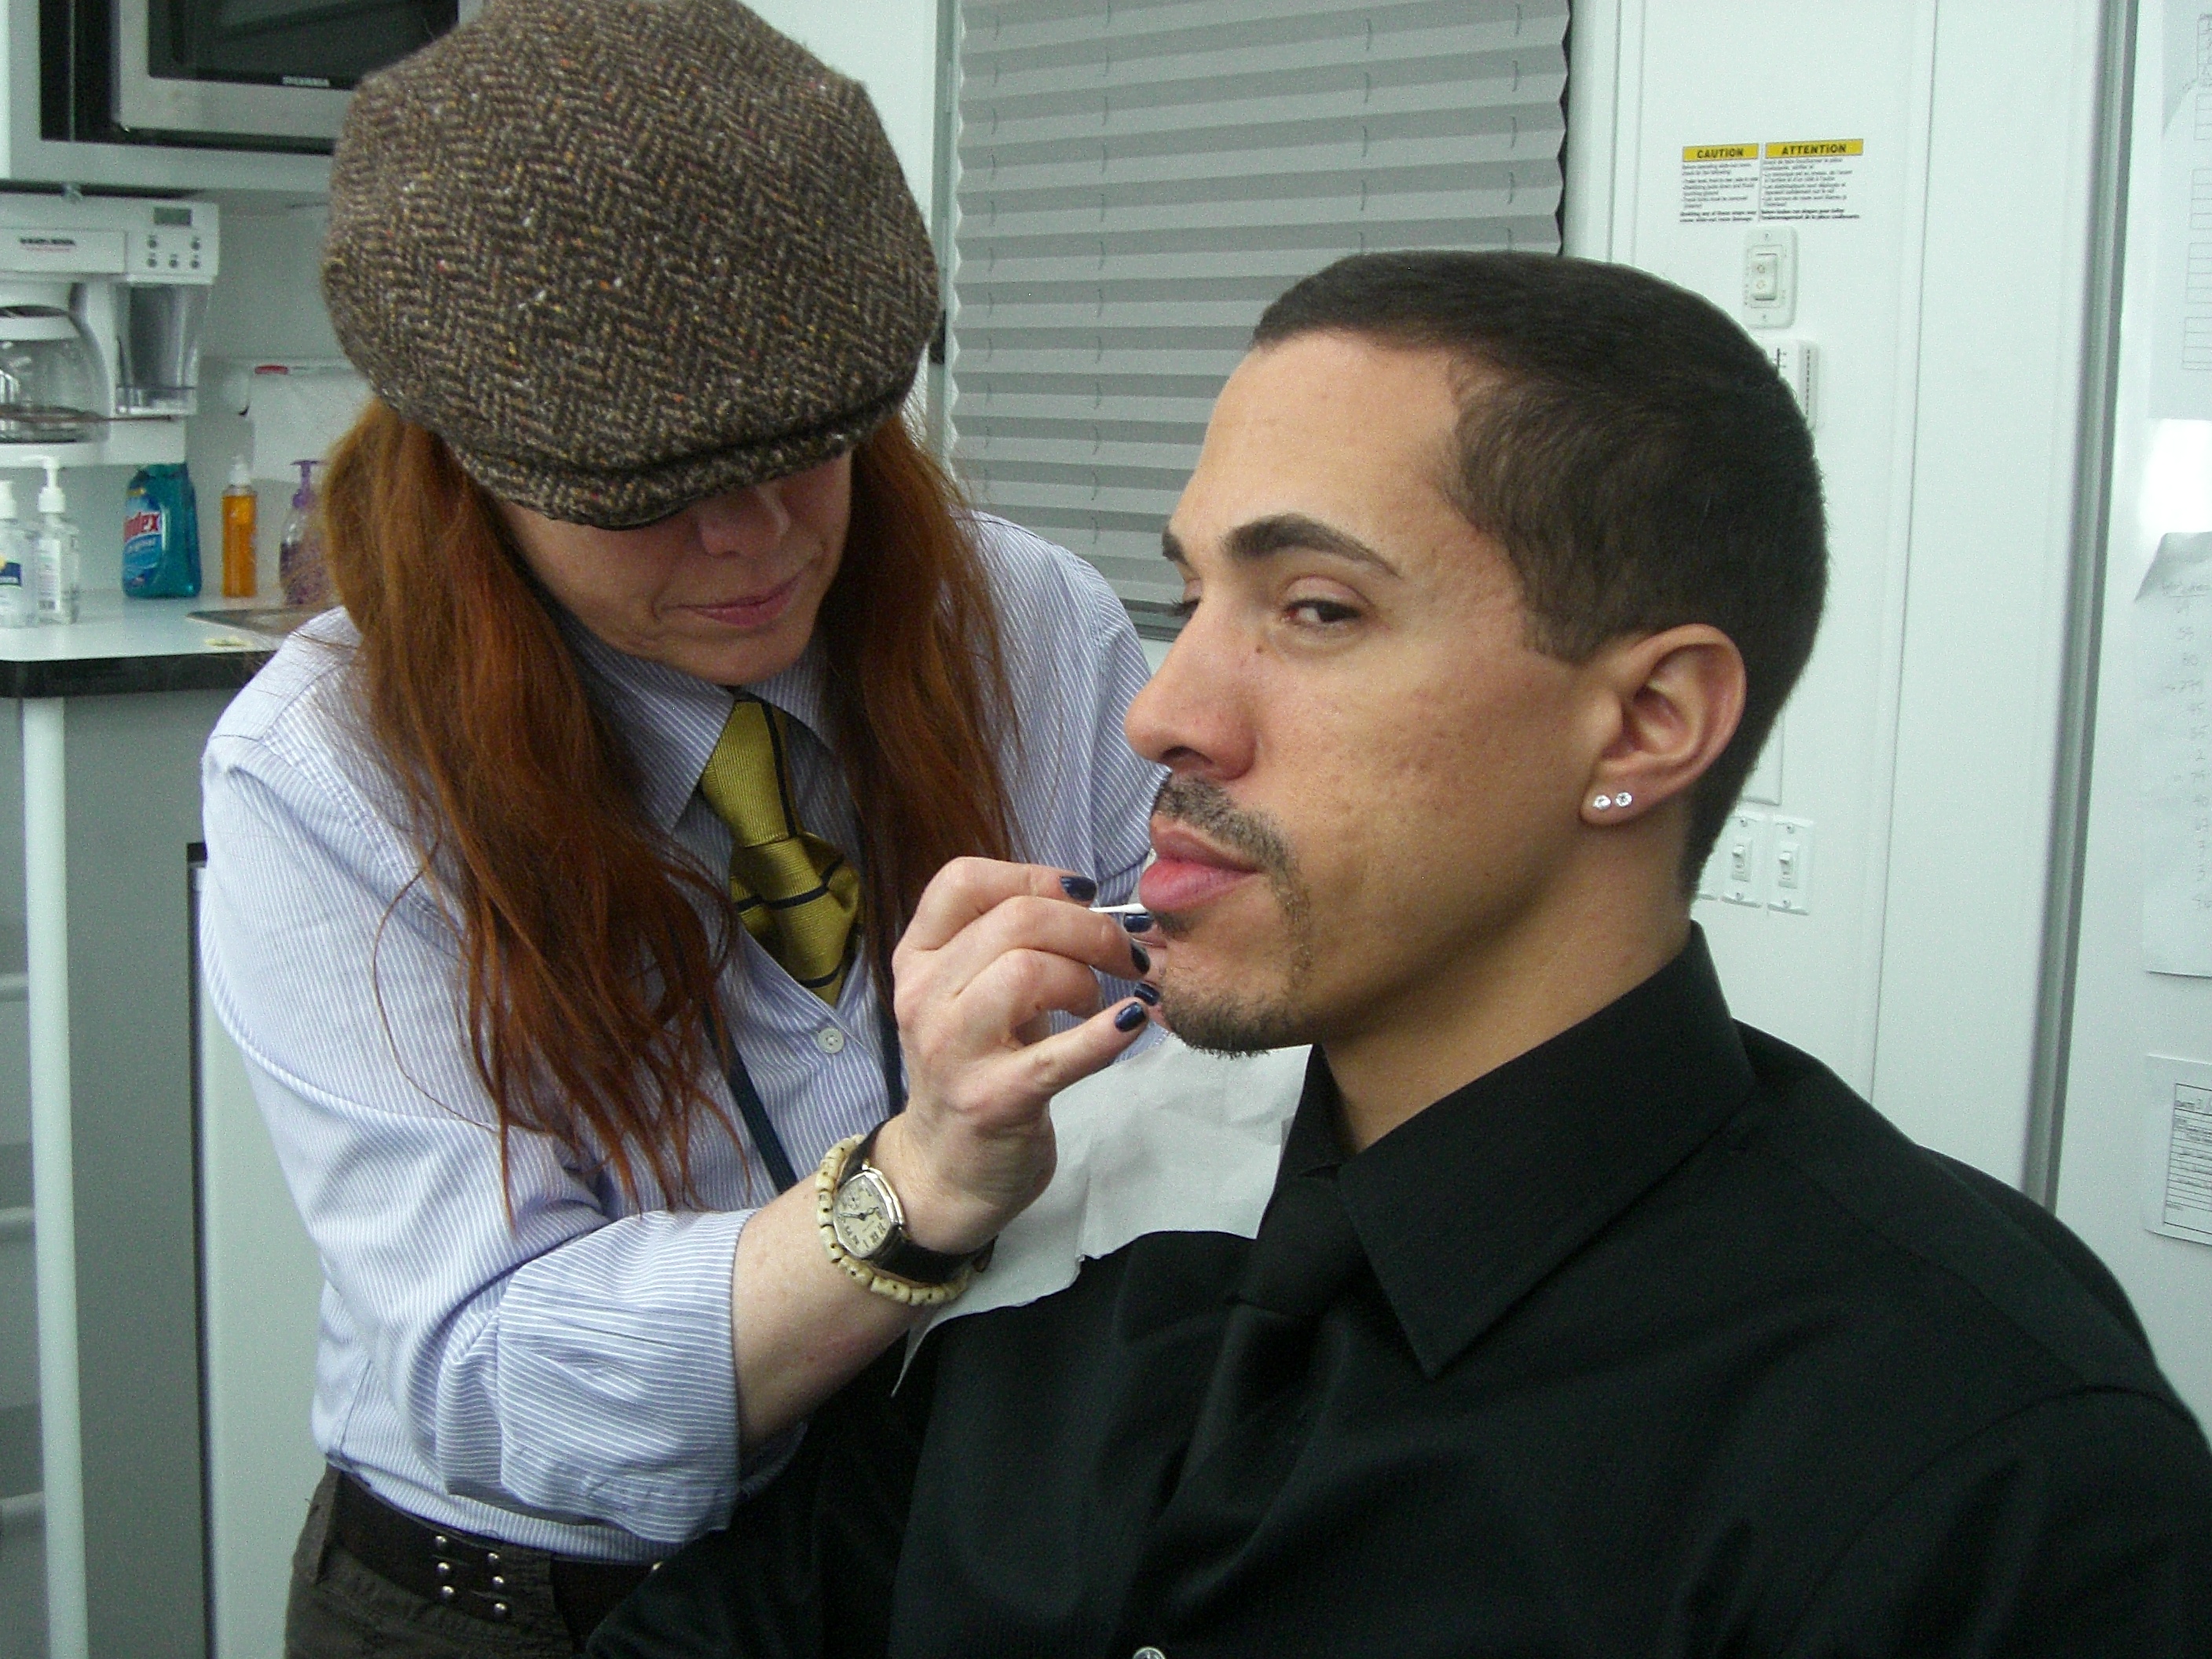 2 hours in the makeup chair to put on my 'stache, hair by hair of course. ABC pilot, See Kate Run.